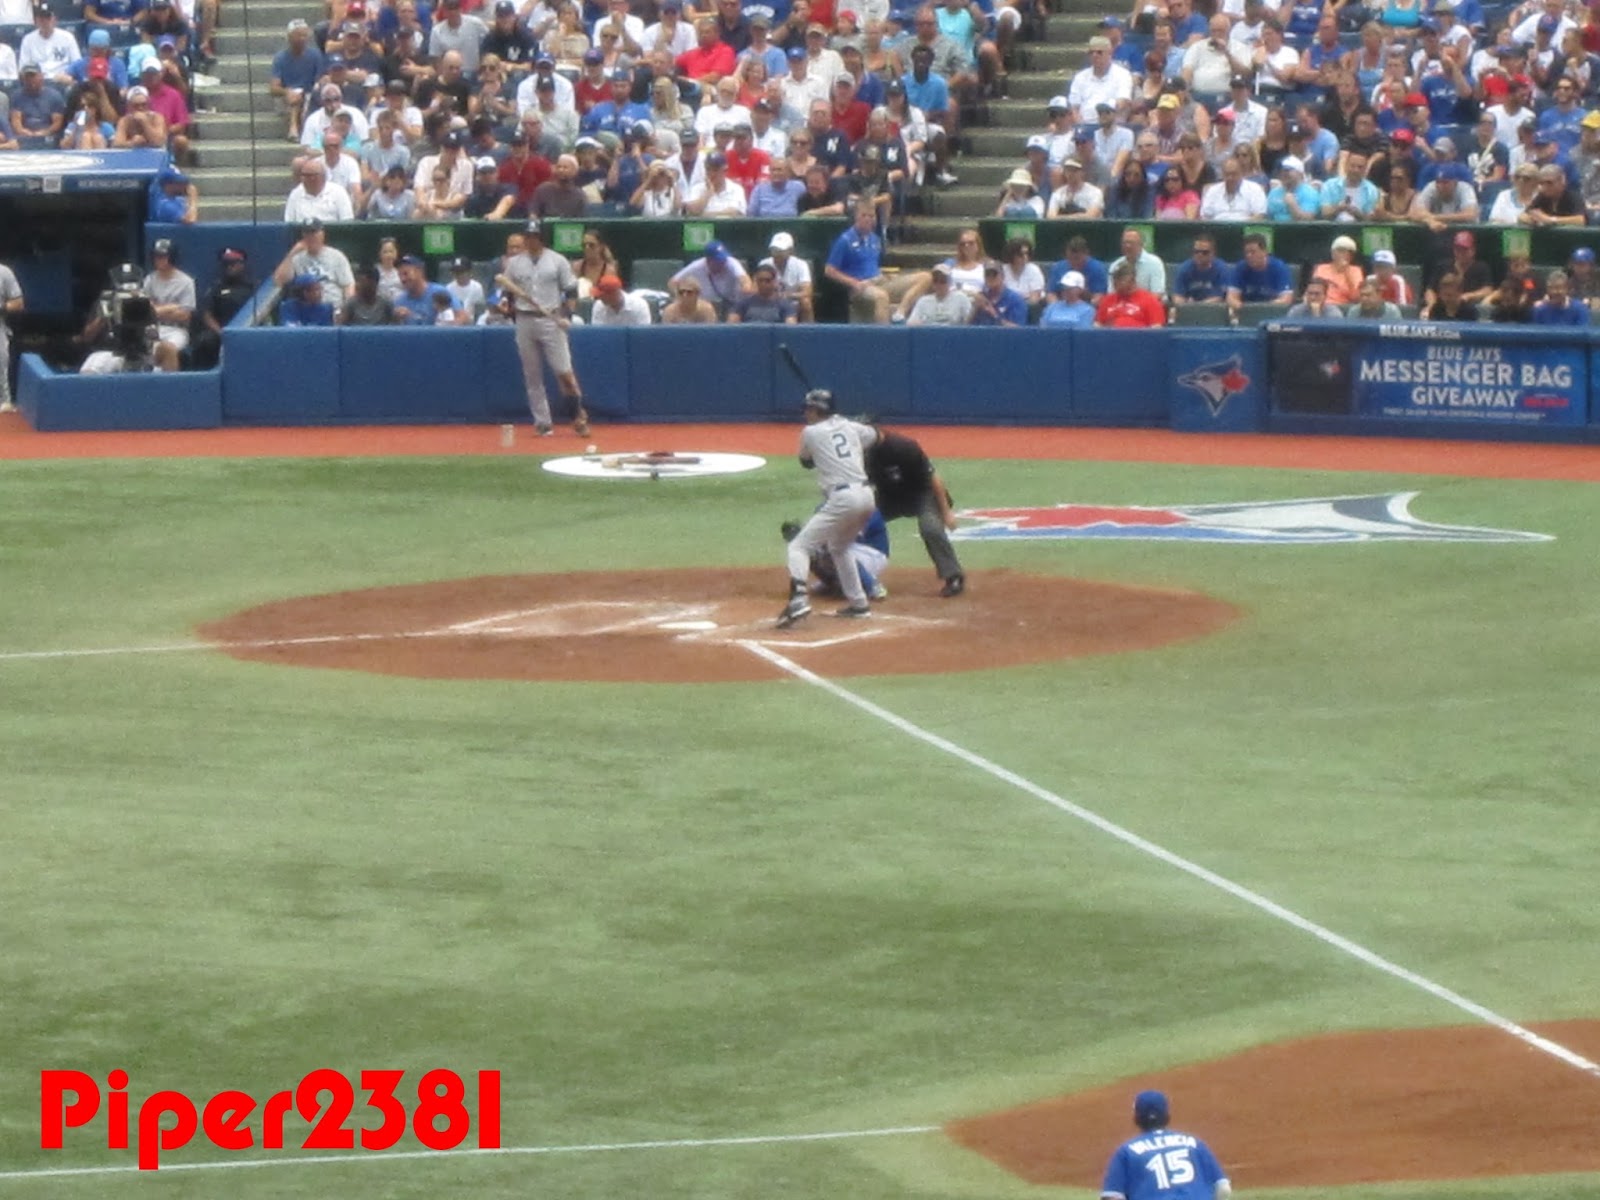 Piper2381: Vlog: Jeter’s Last Game in Toronto, and Stan Lee